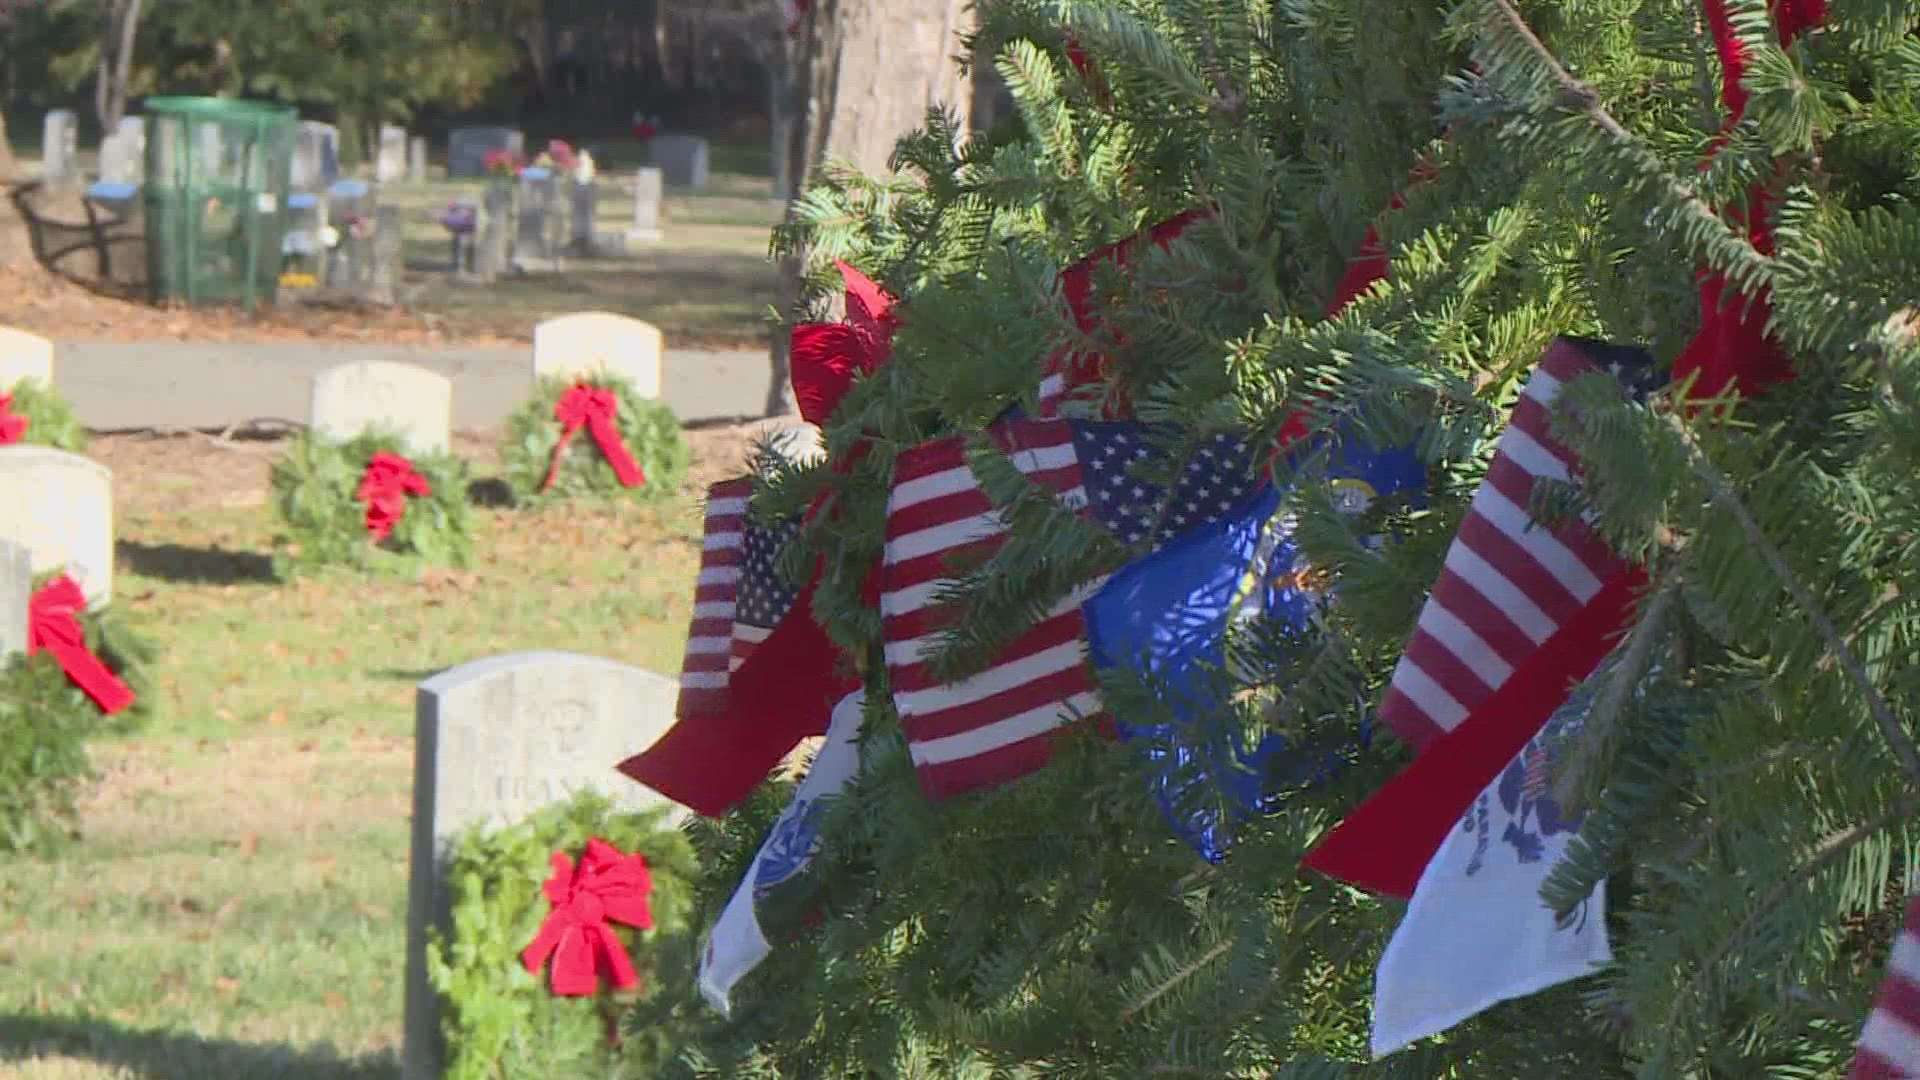 Each year for the past decade, Wreaths Across Greensboro has placed more than 1,100 wreaths on veterans’ graves at Christmas.